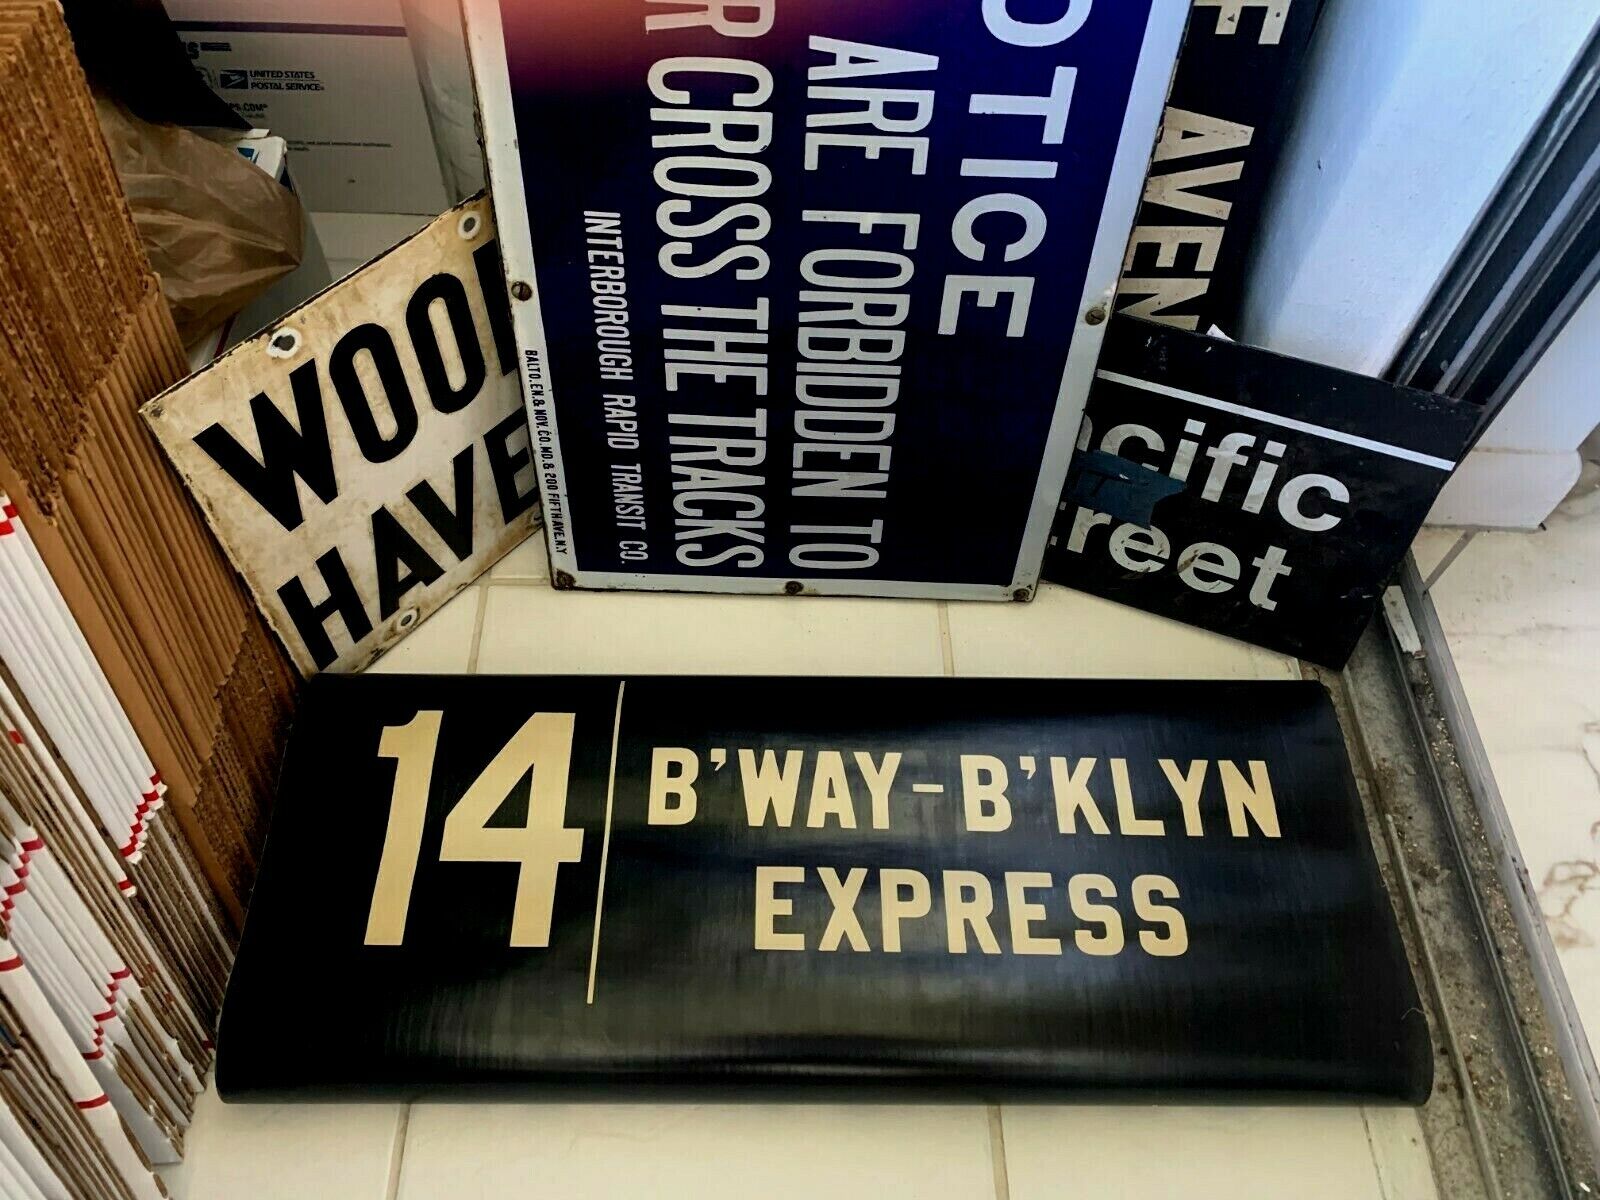 VINTAGE NY NYC SUBWAY ROLL SIGN LARGE BROADWAY THEATER ARTS BROOKLYN EXPRESS #14